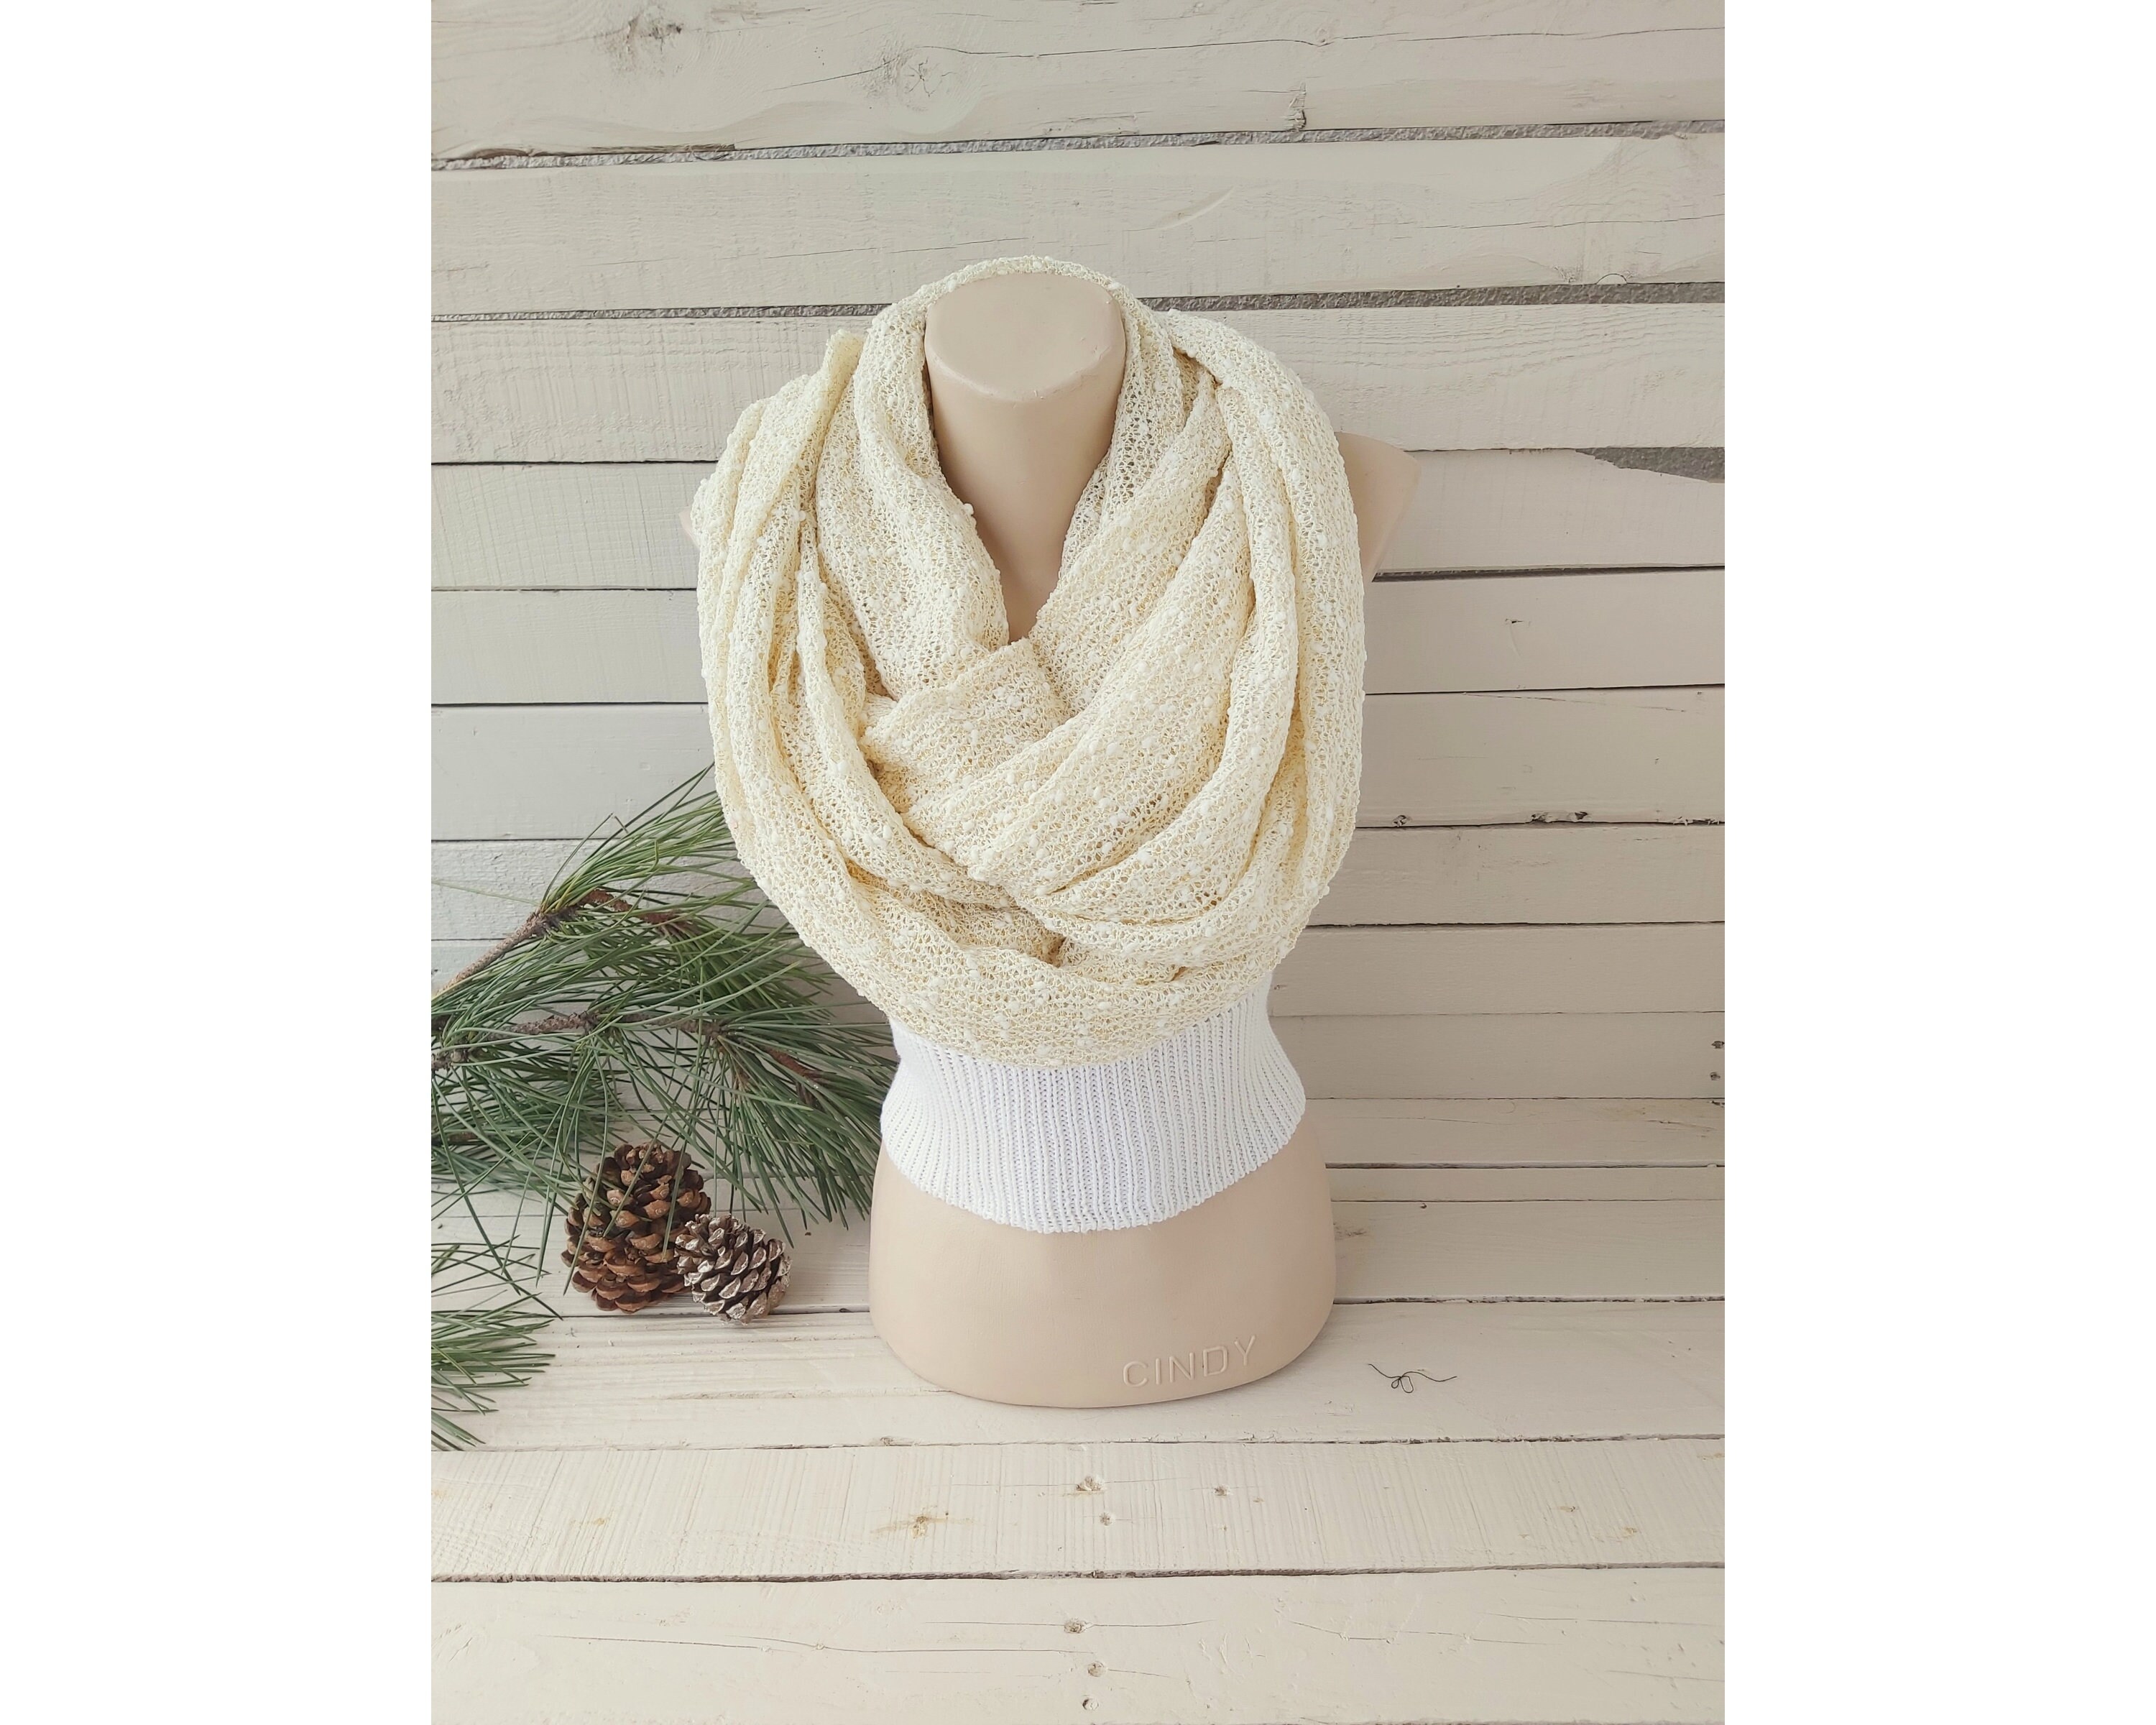 White Tricot Infinity Scarf Woman White Scarf Tricot White Circle Loop Scarf Gift For Her Bright White Scarf